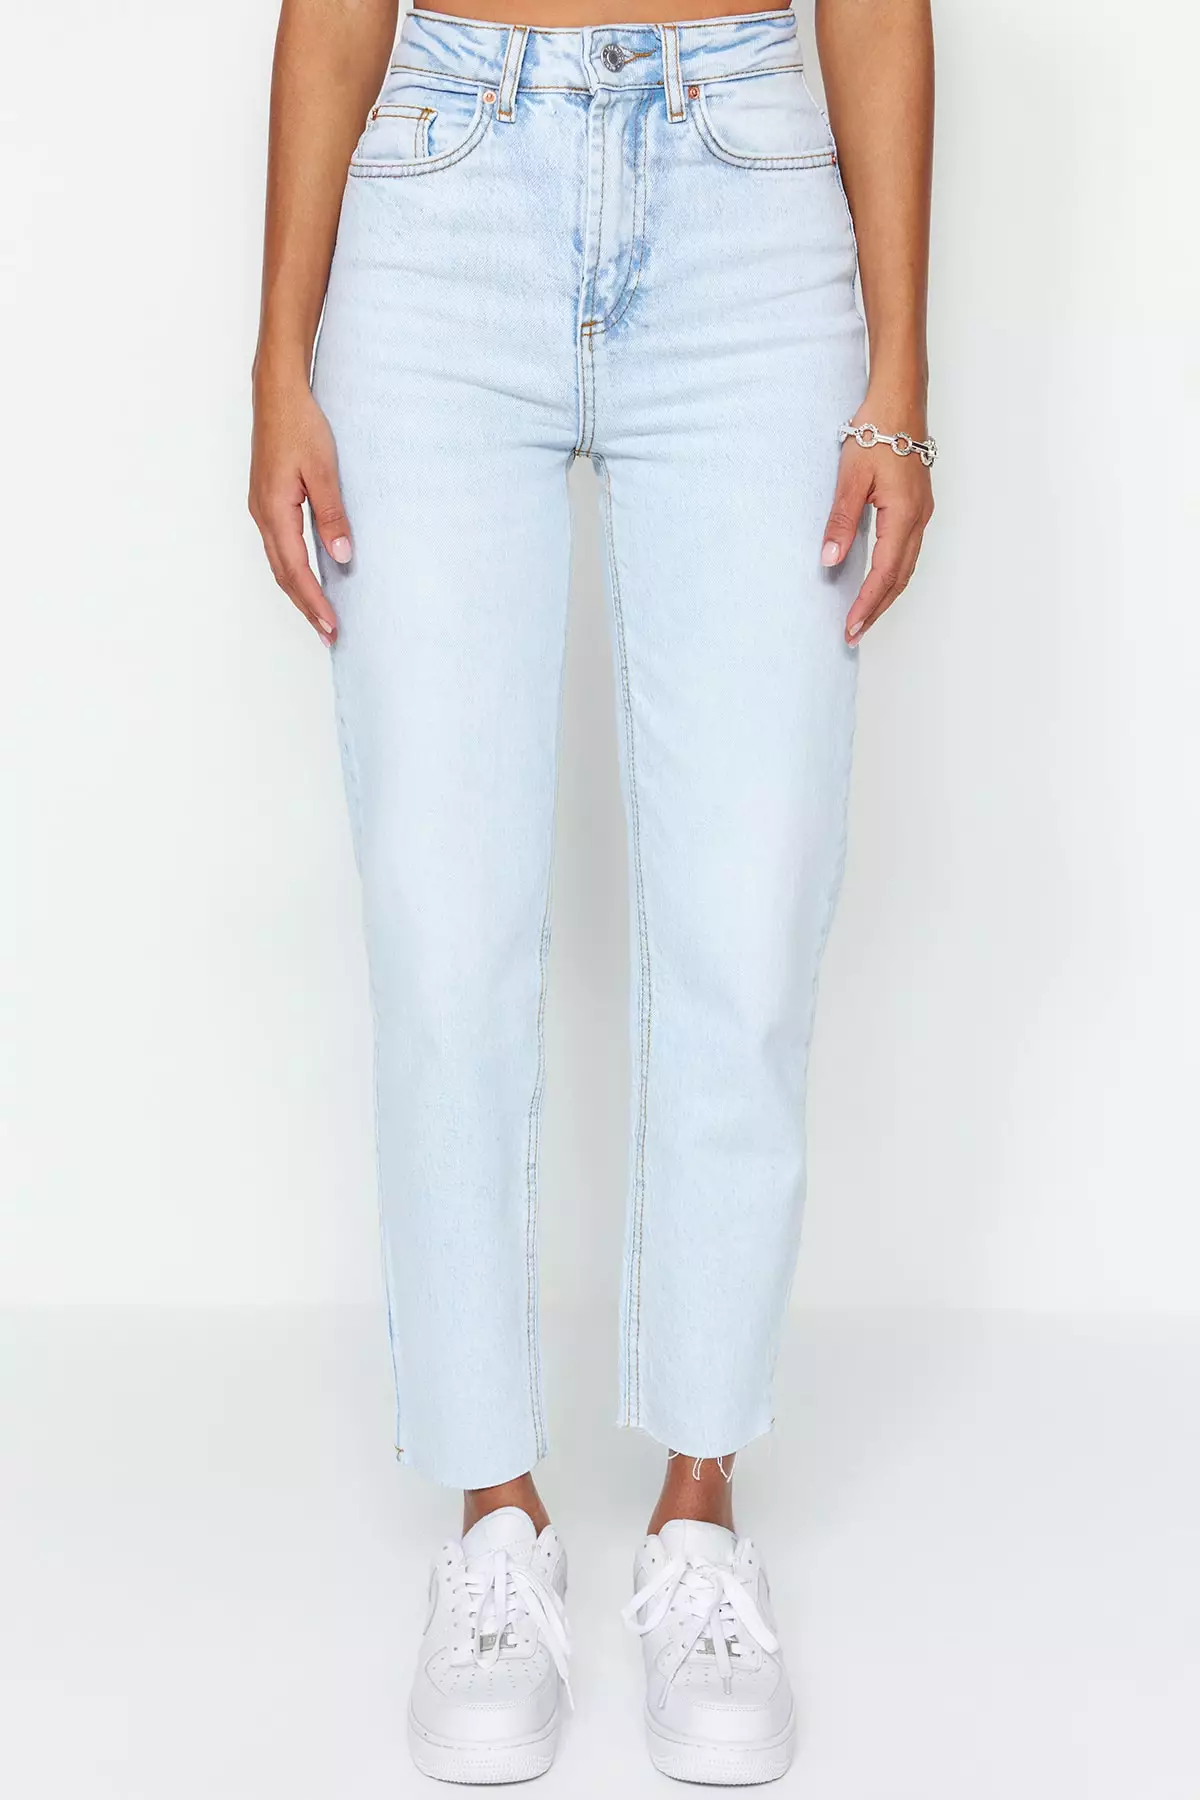 Jeans for Women  Perfect and Fashionable - Trendyol